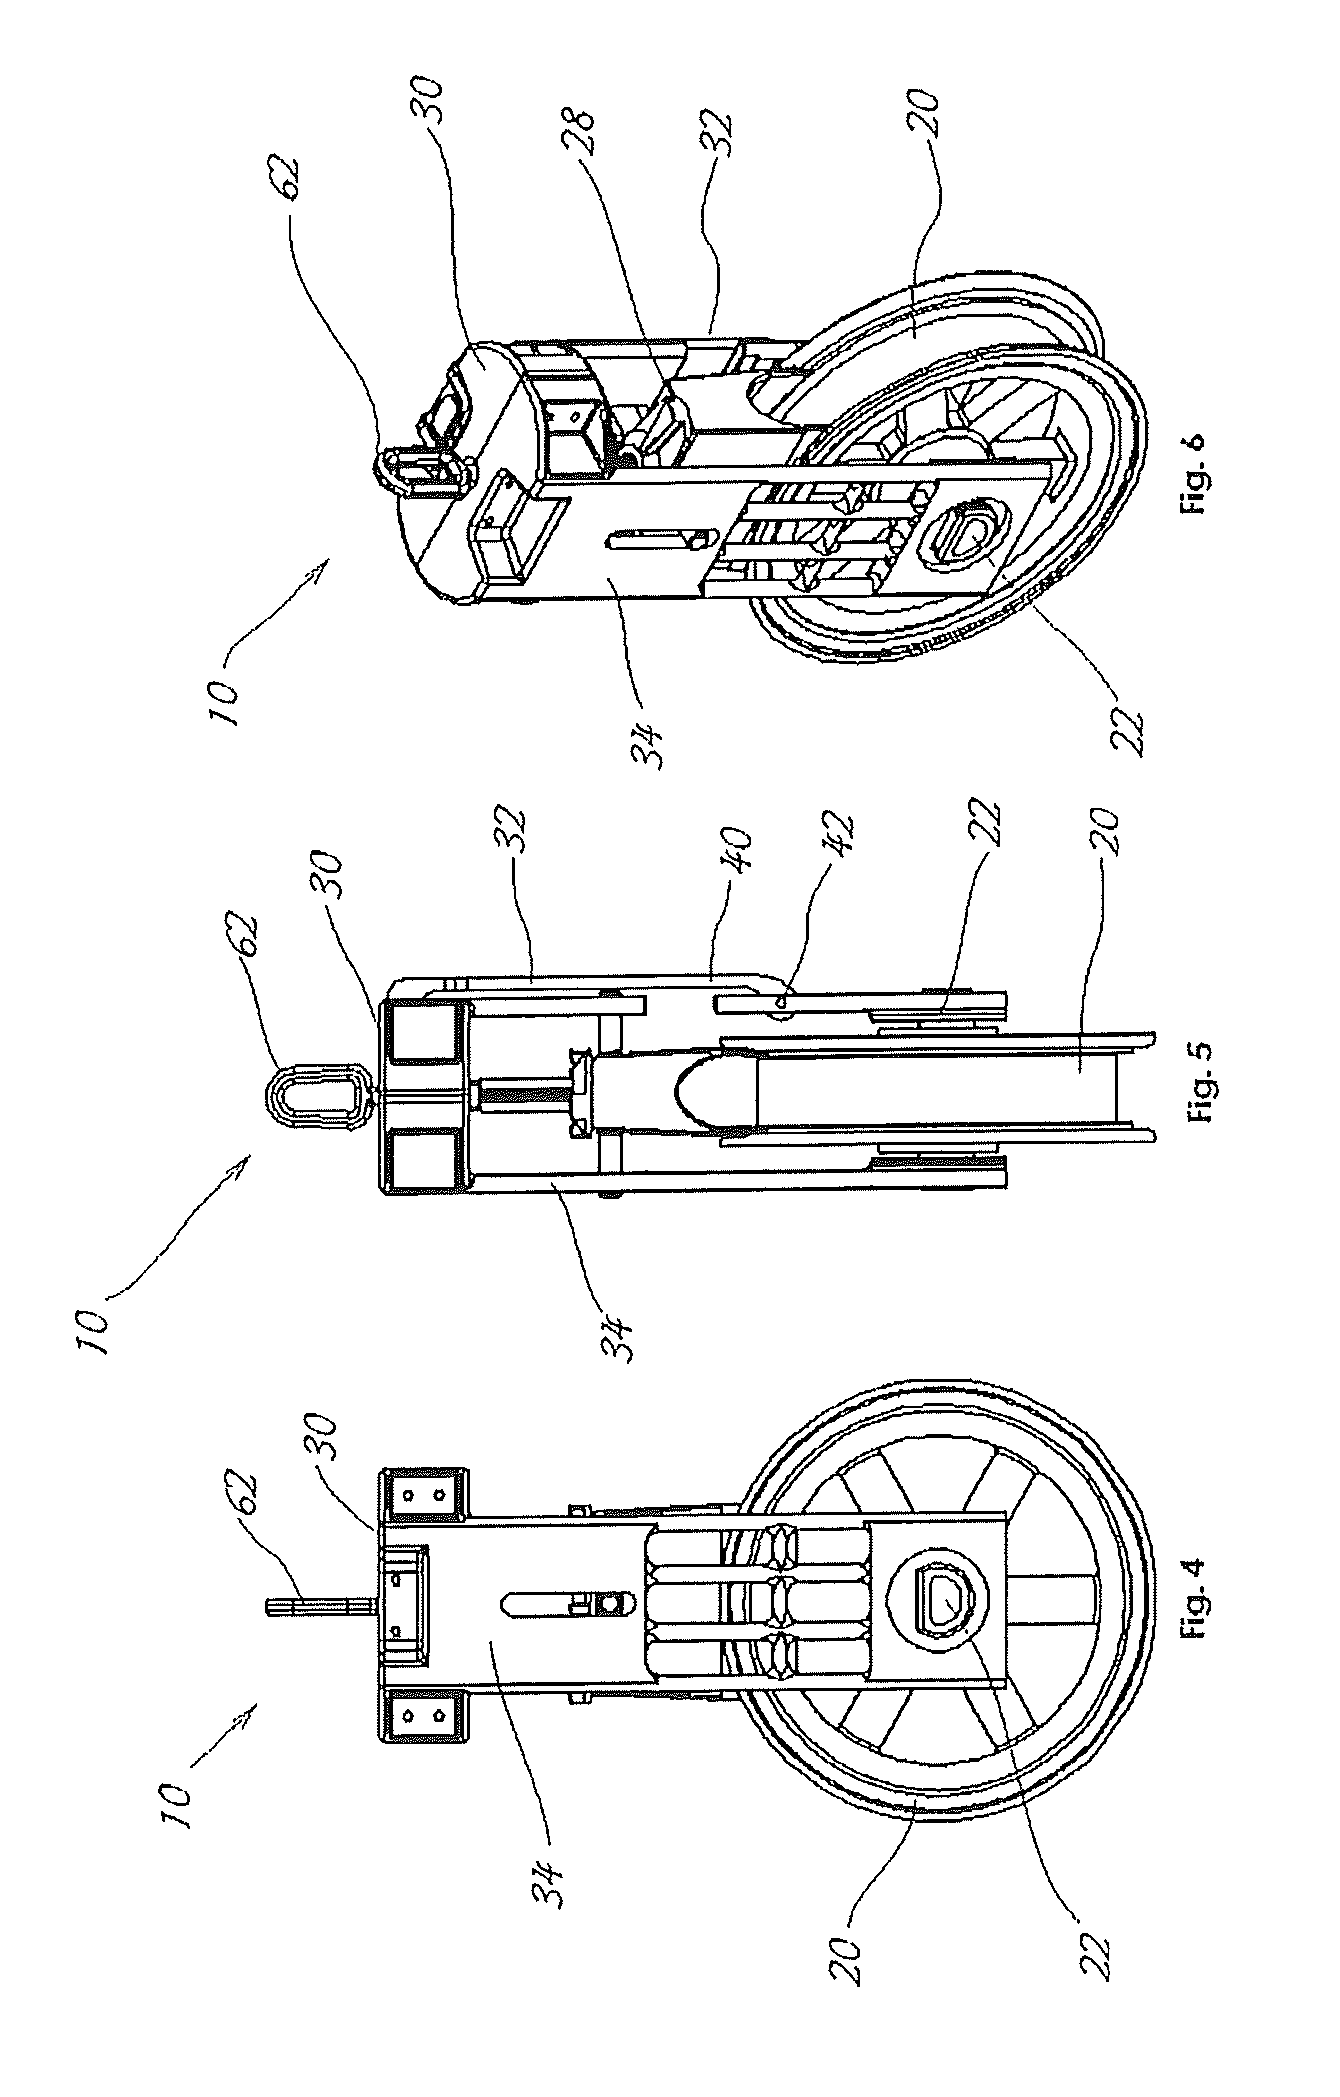 Aerial sheave device